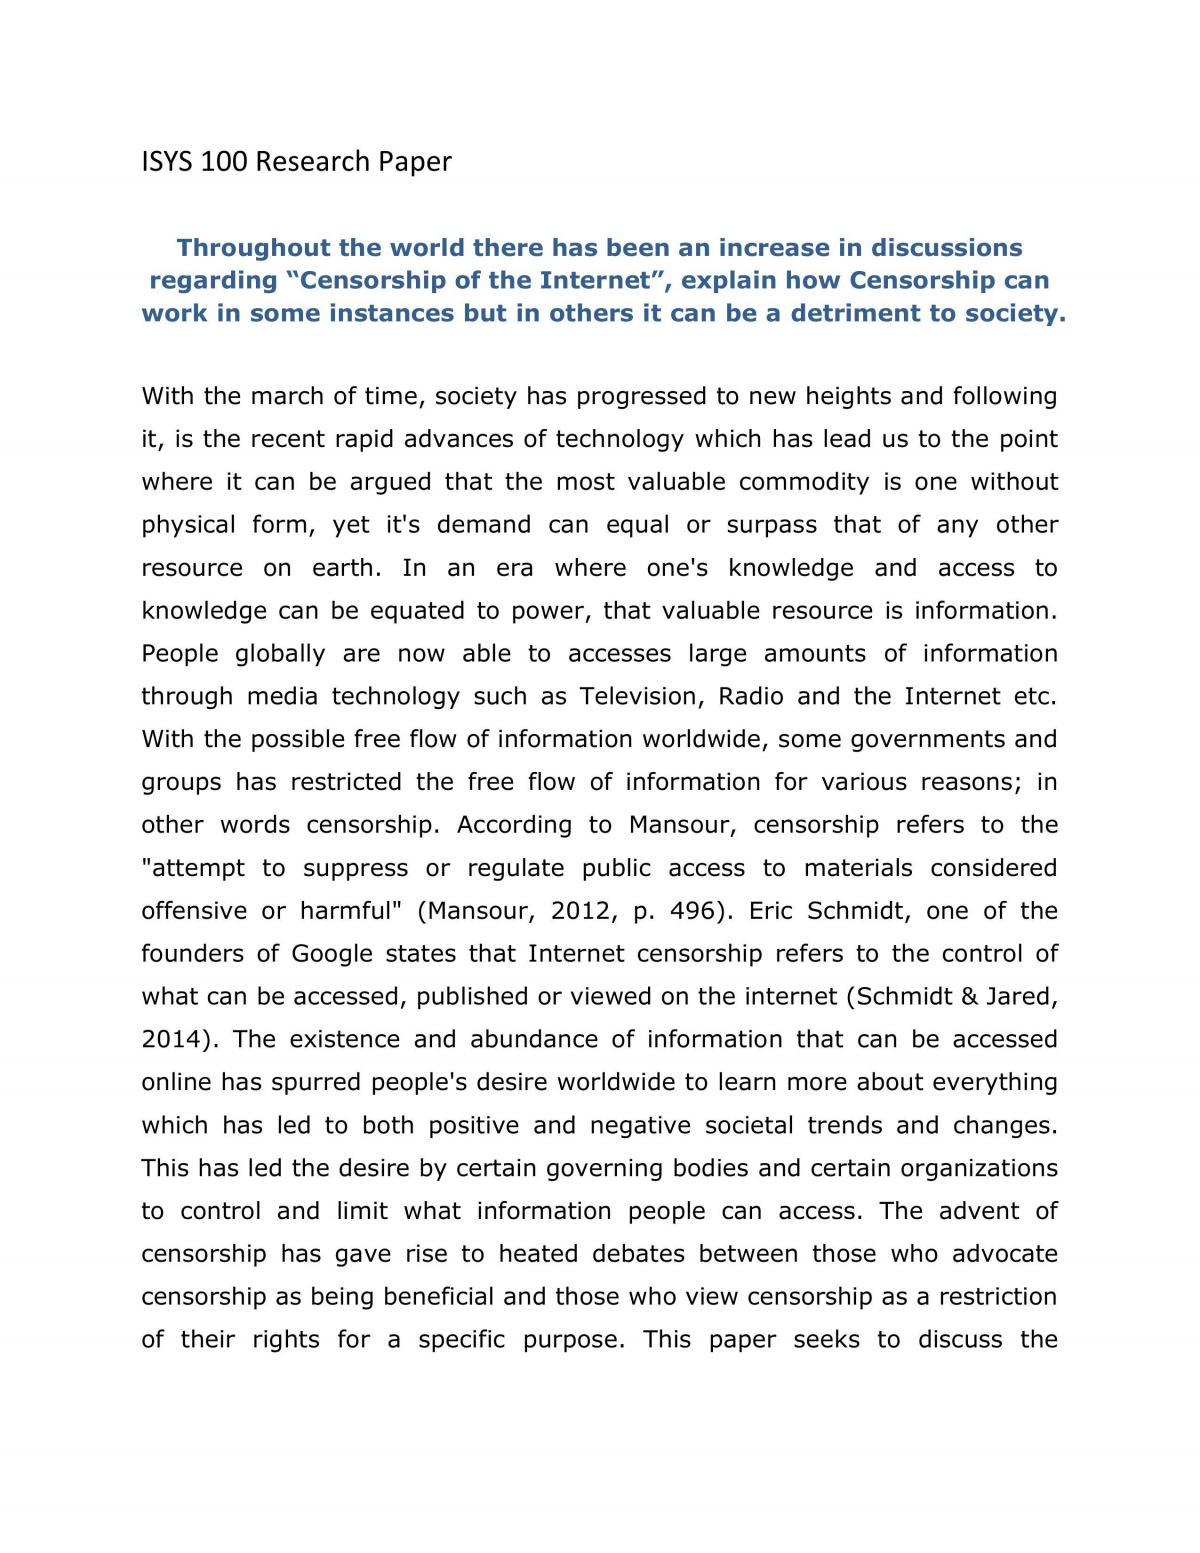 ISYS100 Final Research Paper on Internet Censorship - Page 1